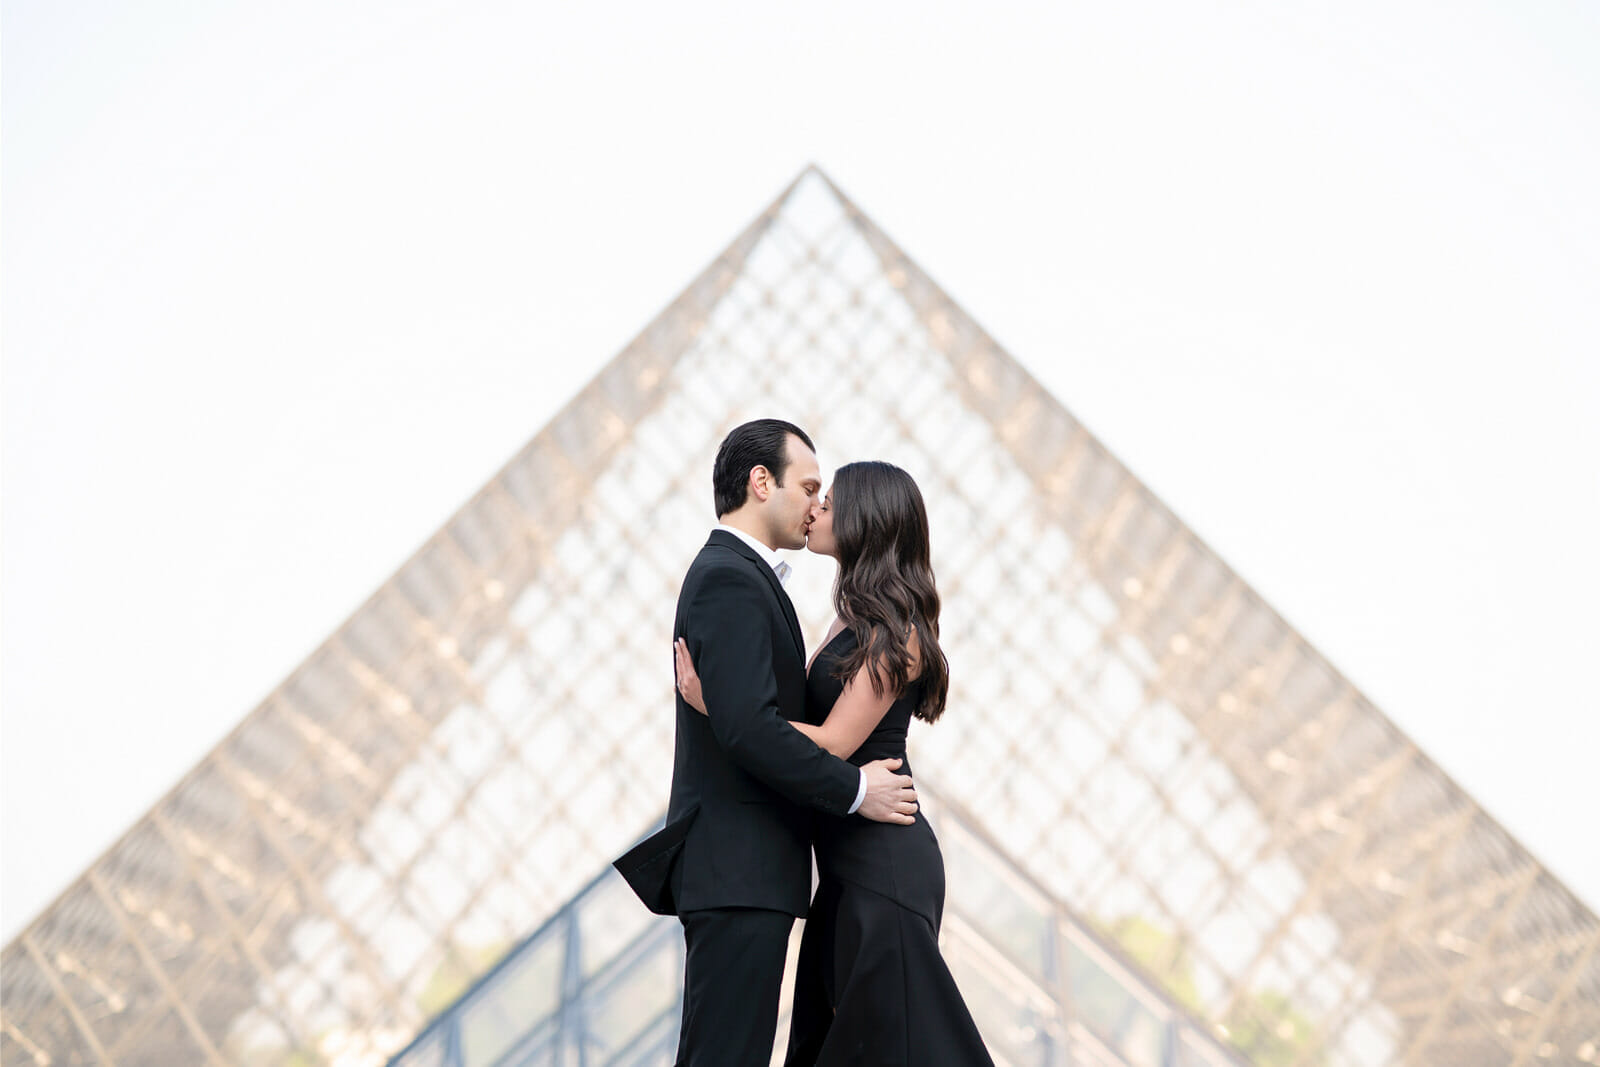 beautiful Paris couple photo shoot at the Louvre Museum in front of the pyramid